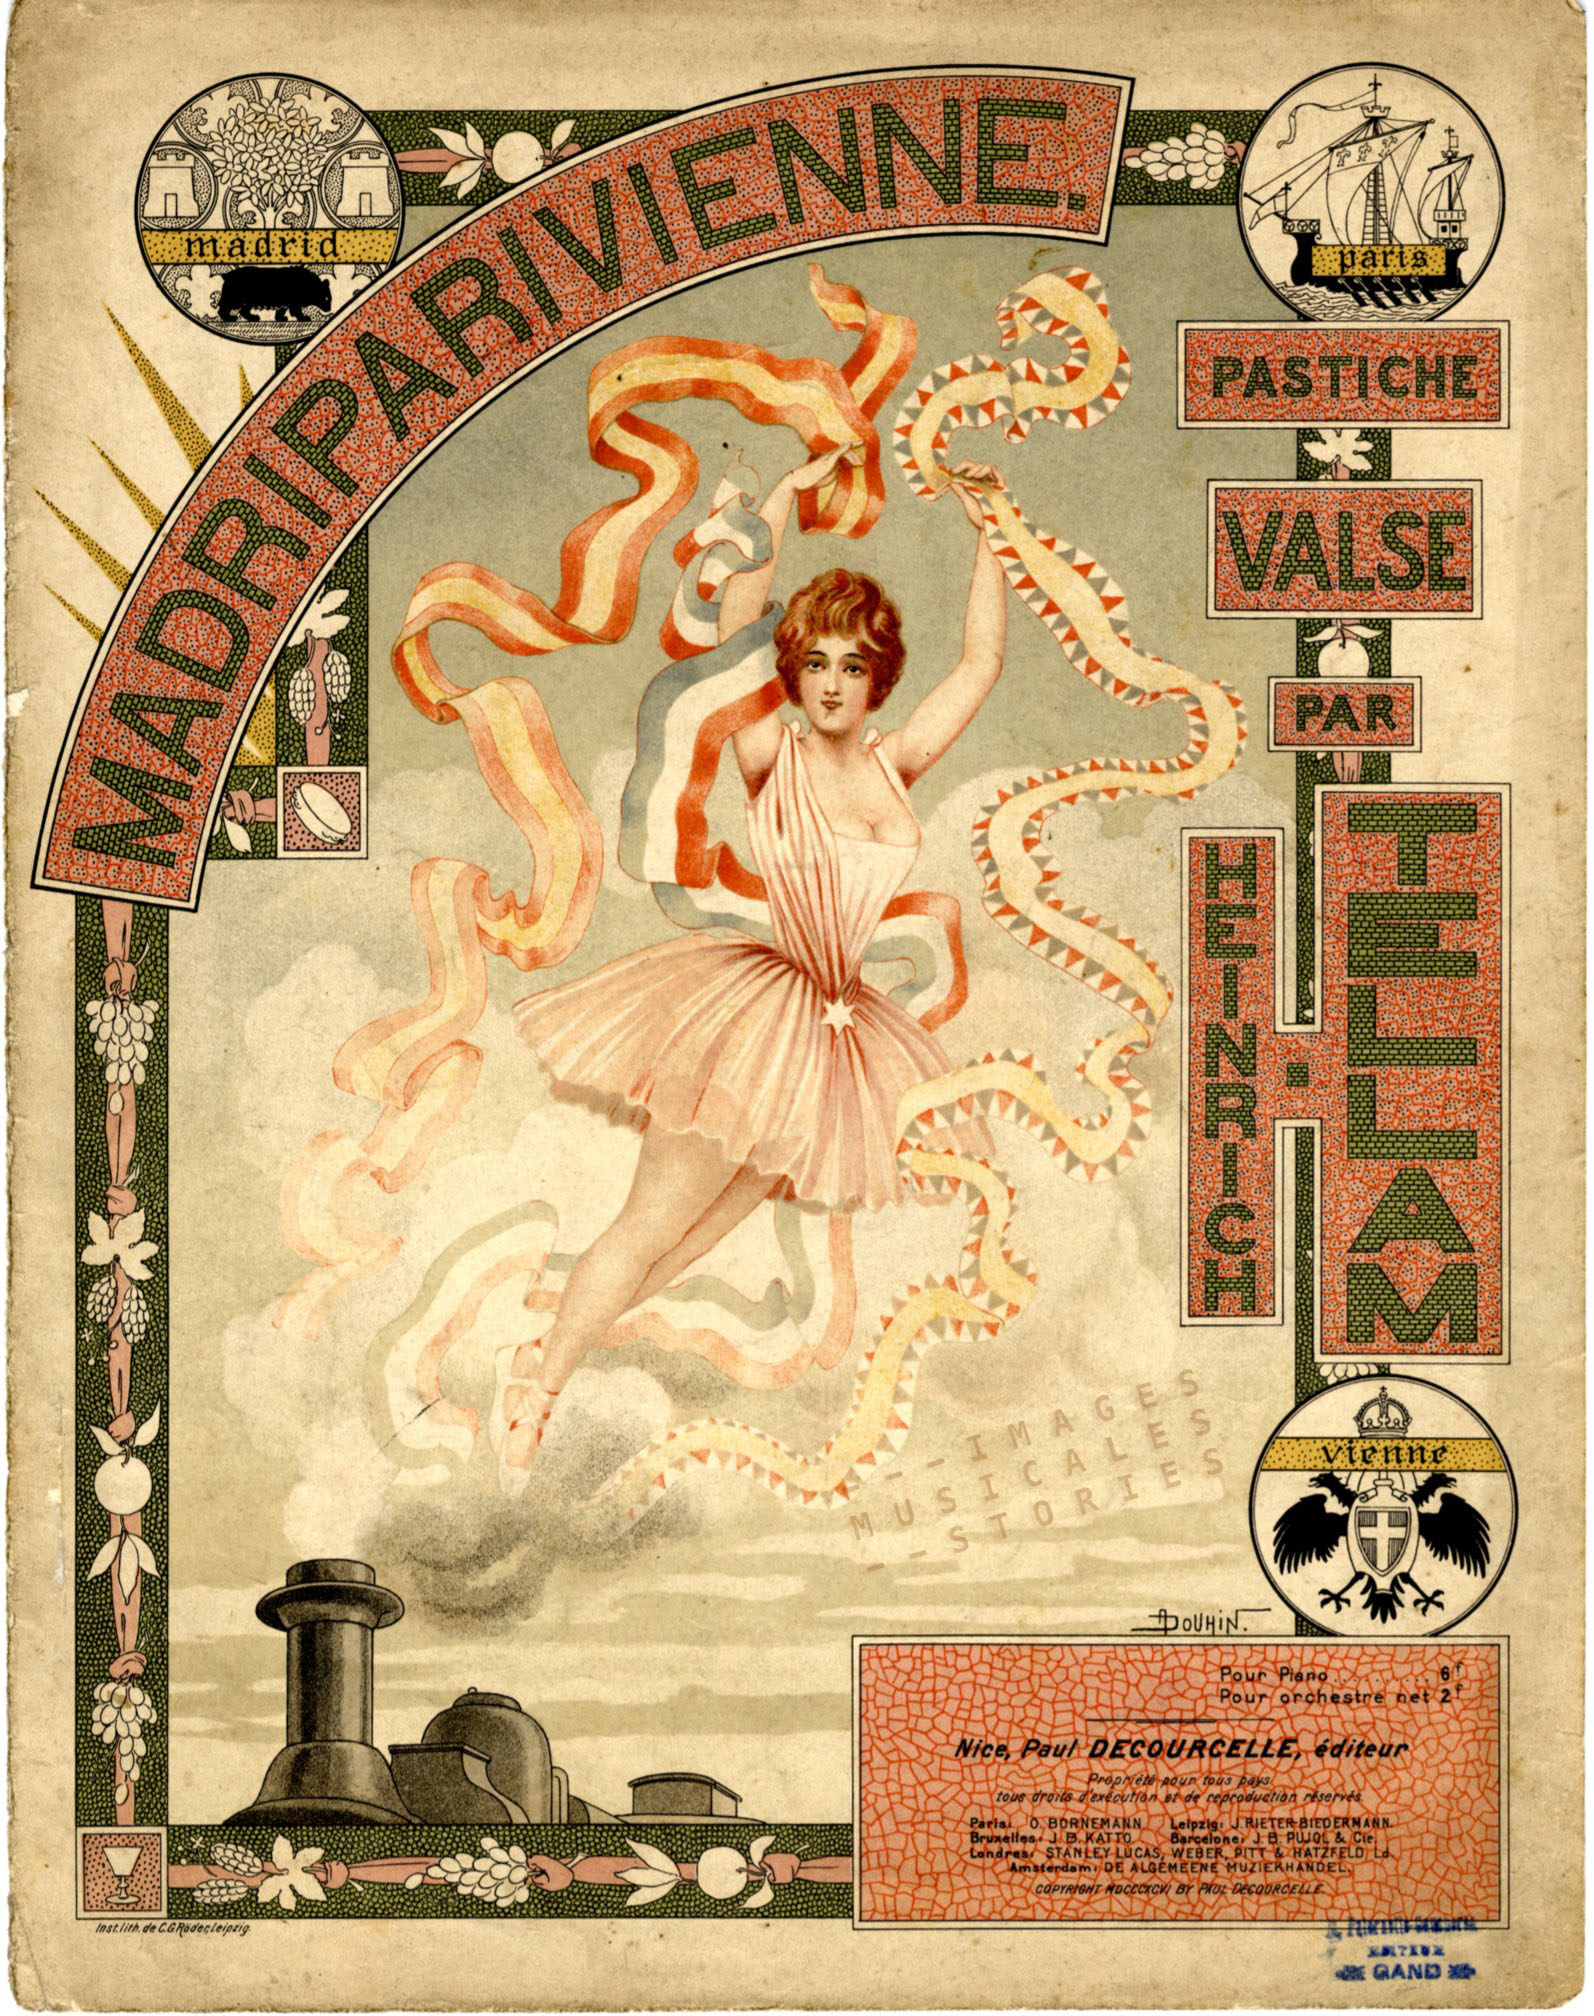 'MadriPariVienne' by H. Tellam. Sheet music cover illustrated by André Douhin (1896)